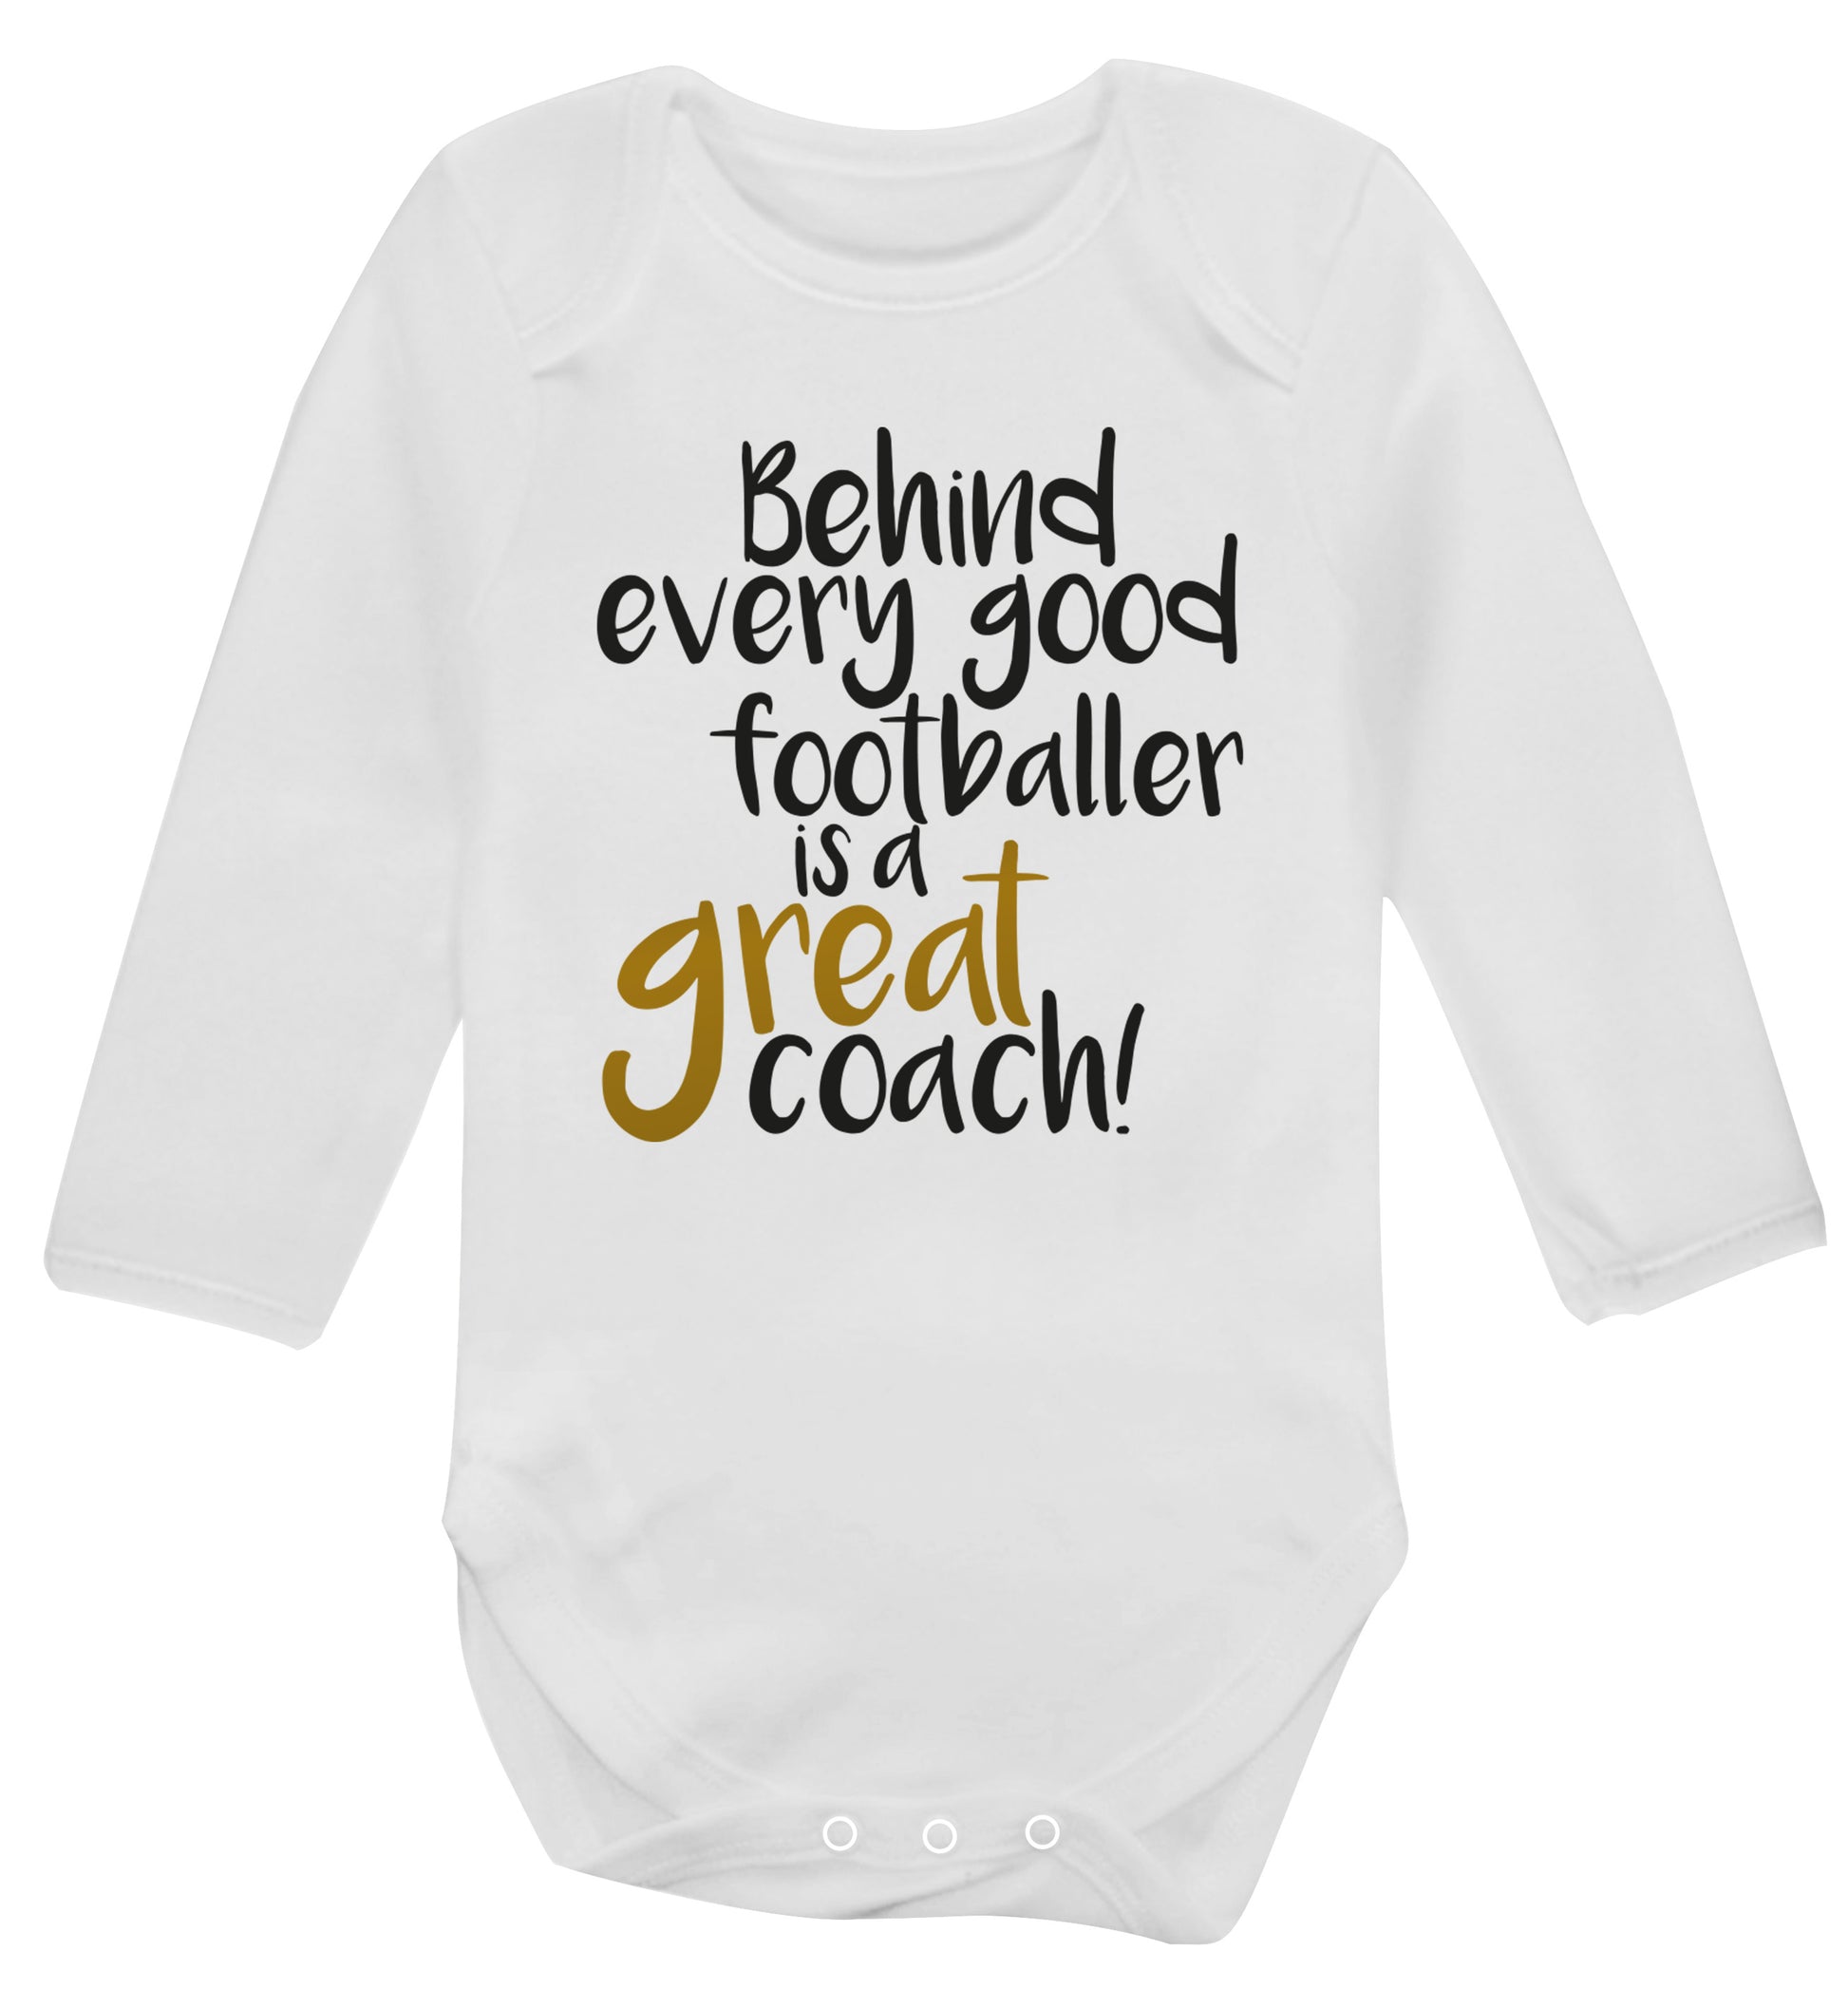 Behind every good footballer is a great coach! Baby Vest long sleeved white 6-12 months